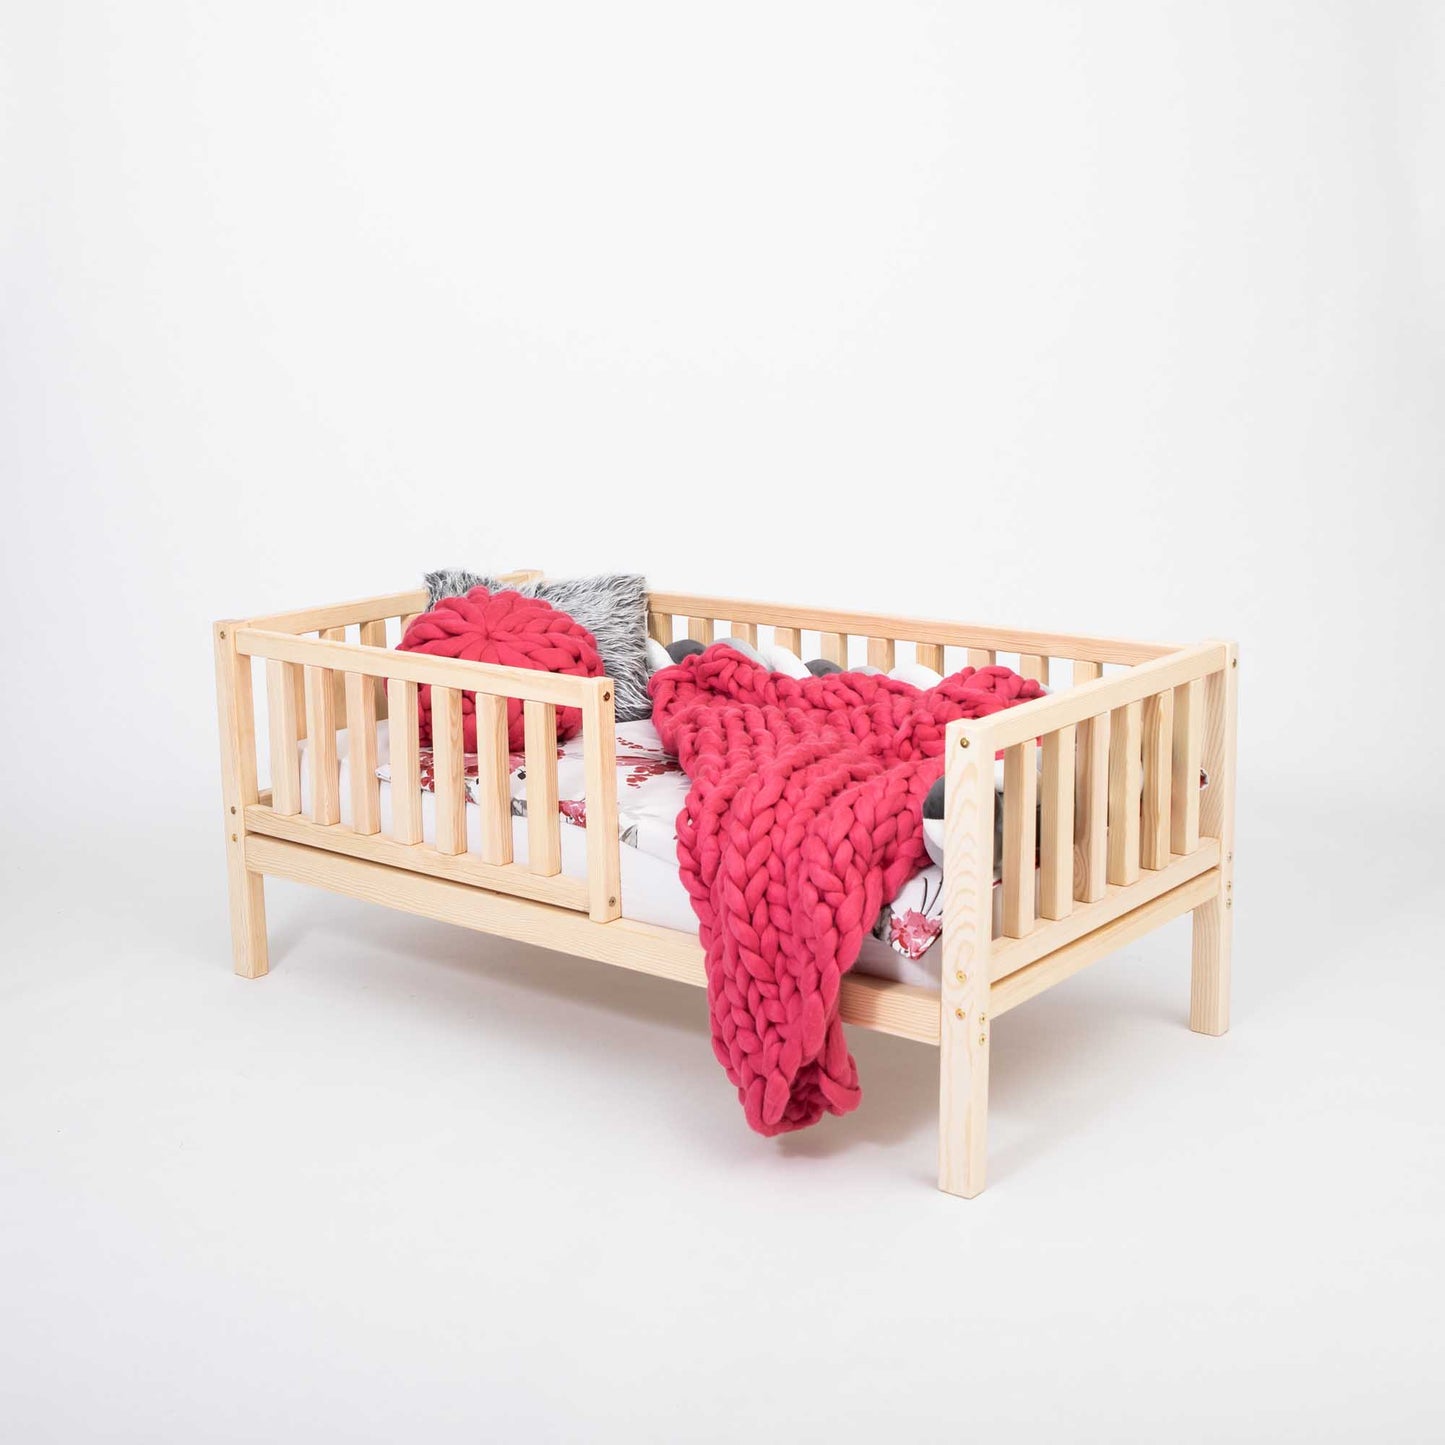 A long-lasting Sweet Home From Wood 2-in-1 toddler bed on legs with a vertical rail fence, adorned with a pink blanket.